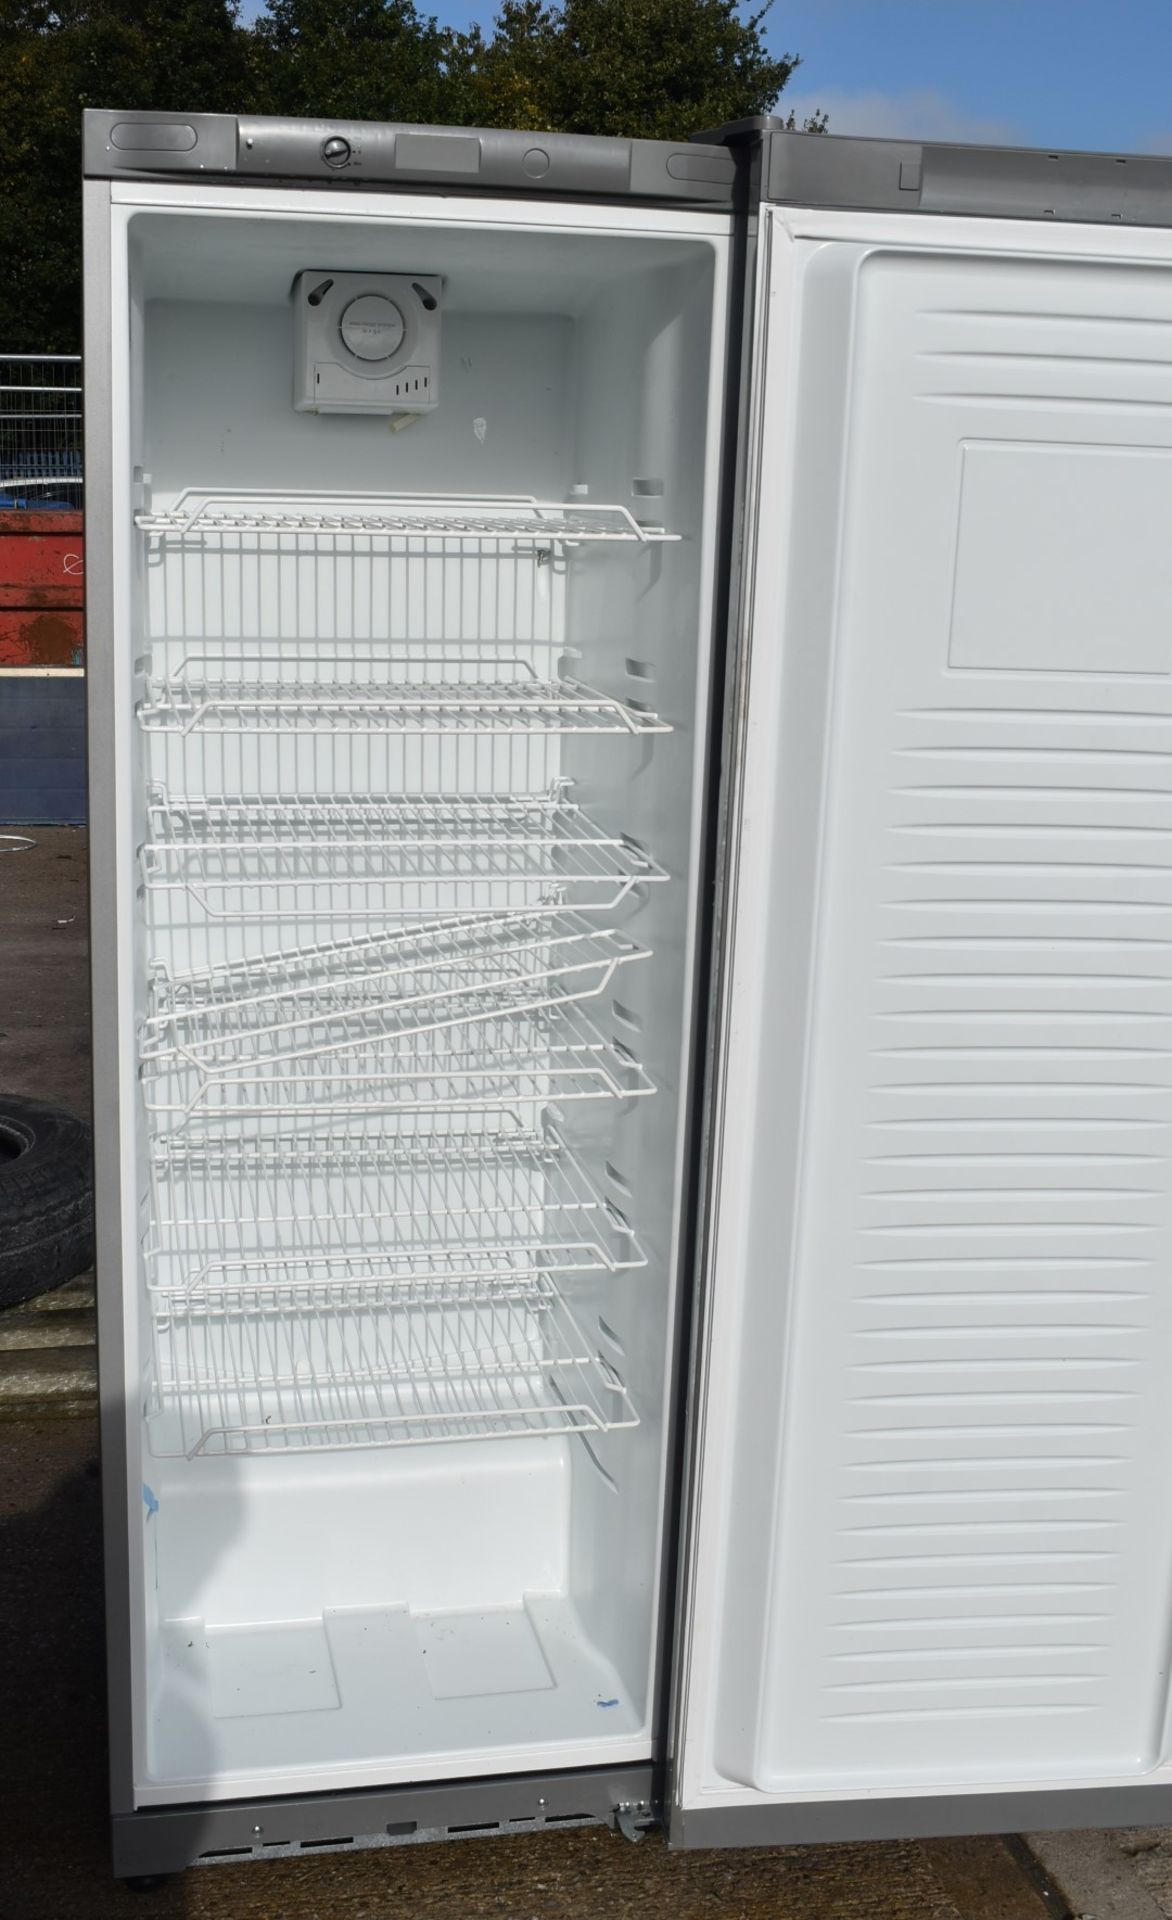 1 x Elstar Upright Commercial Refridgerator With Silver Finish - Model ARR350S - Image 4 of 8